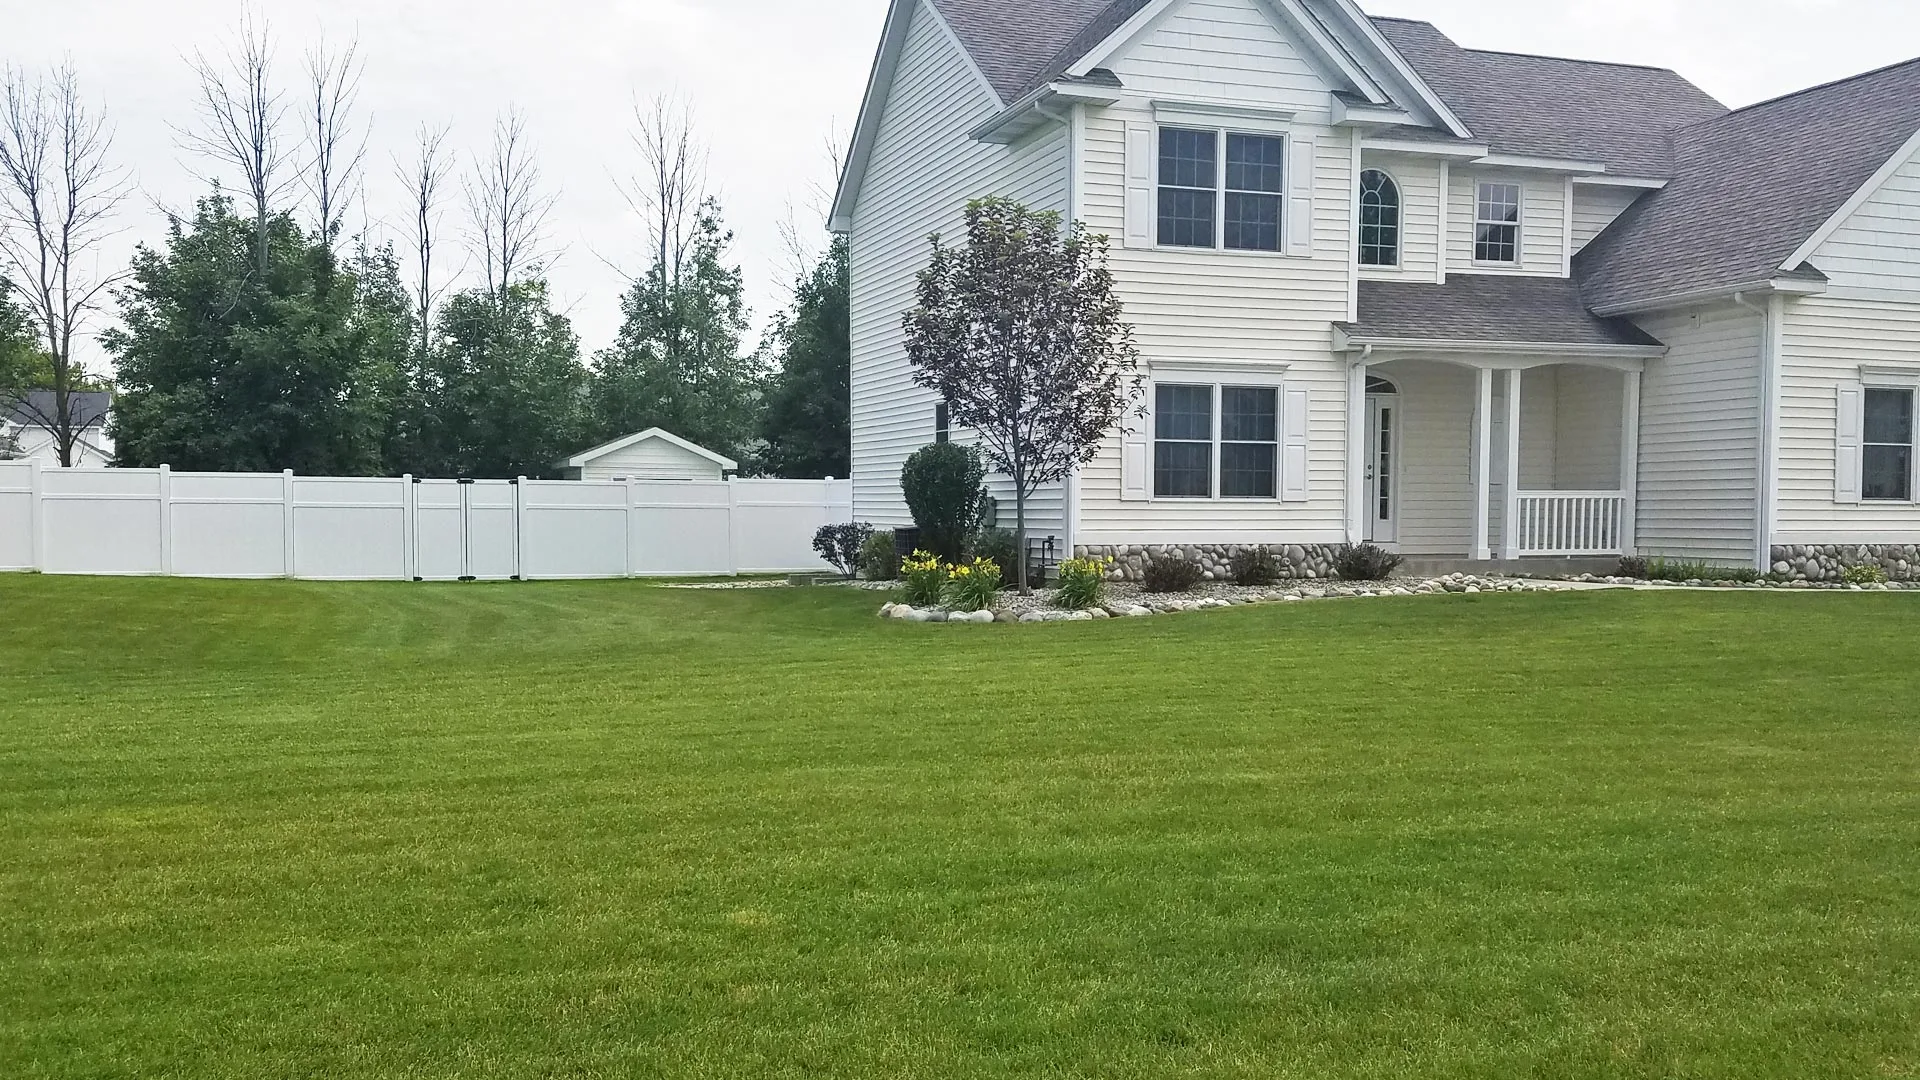 Residential property in Midland, MI that was recently mowed and maintained by our team.